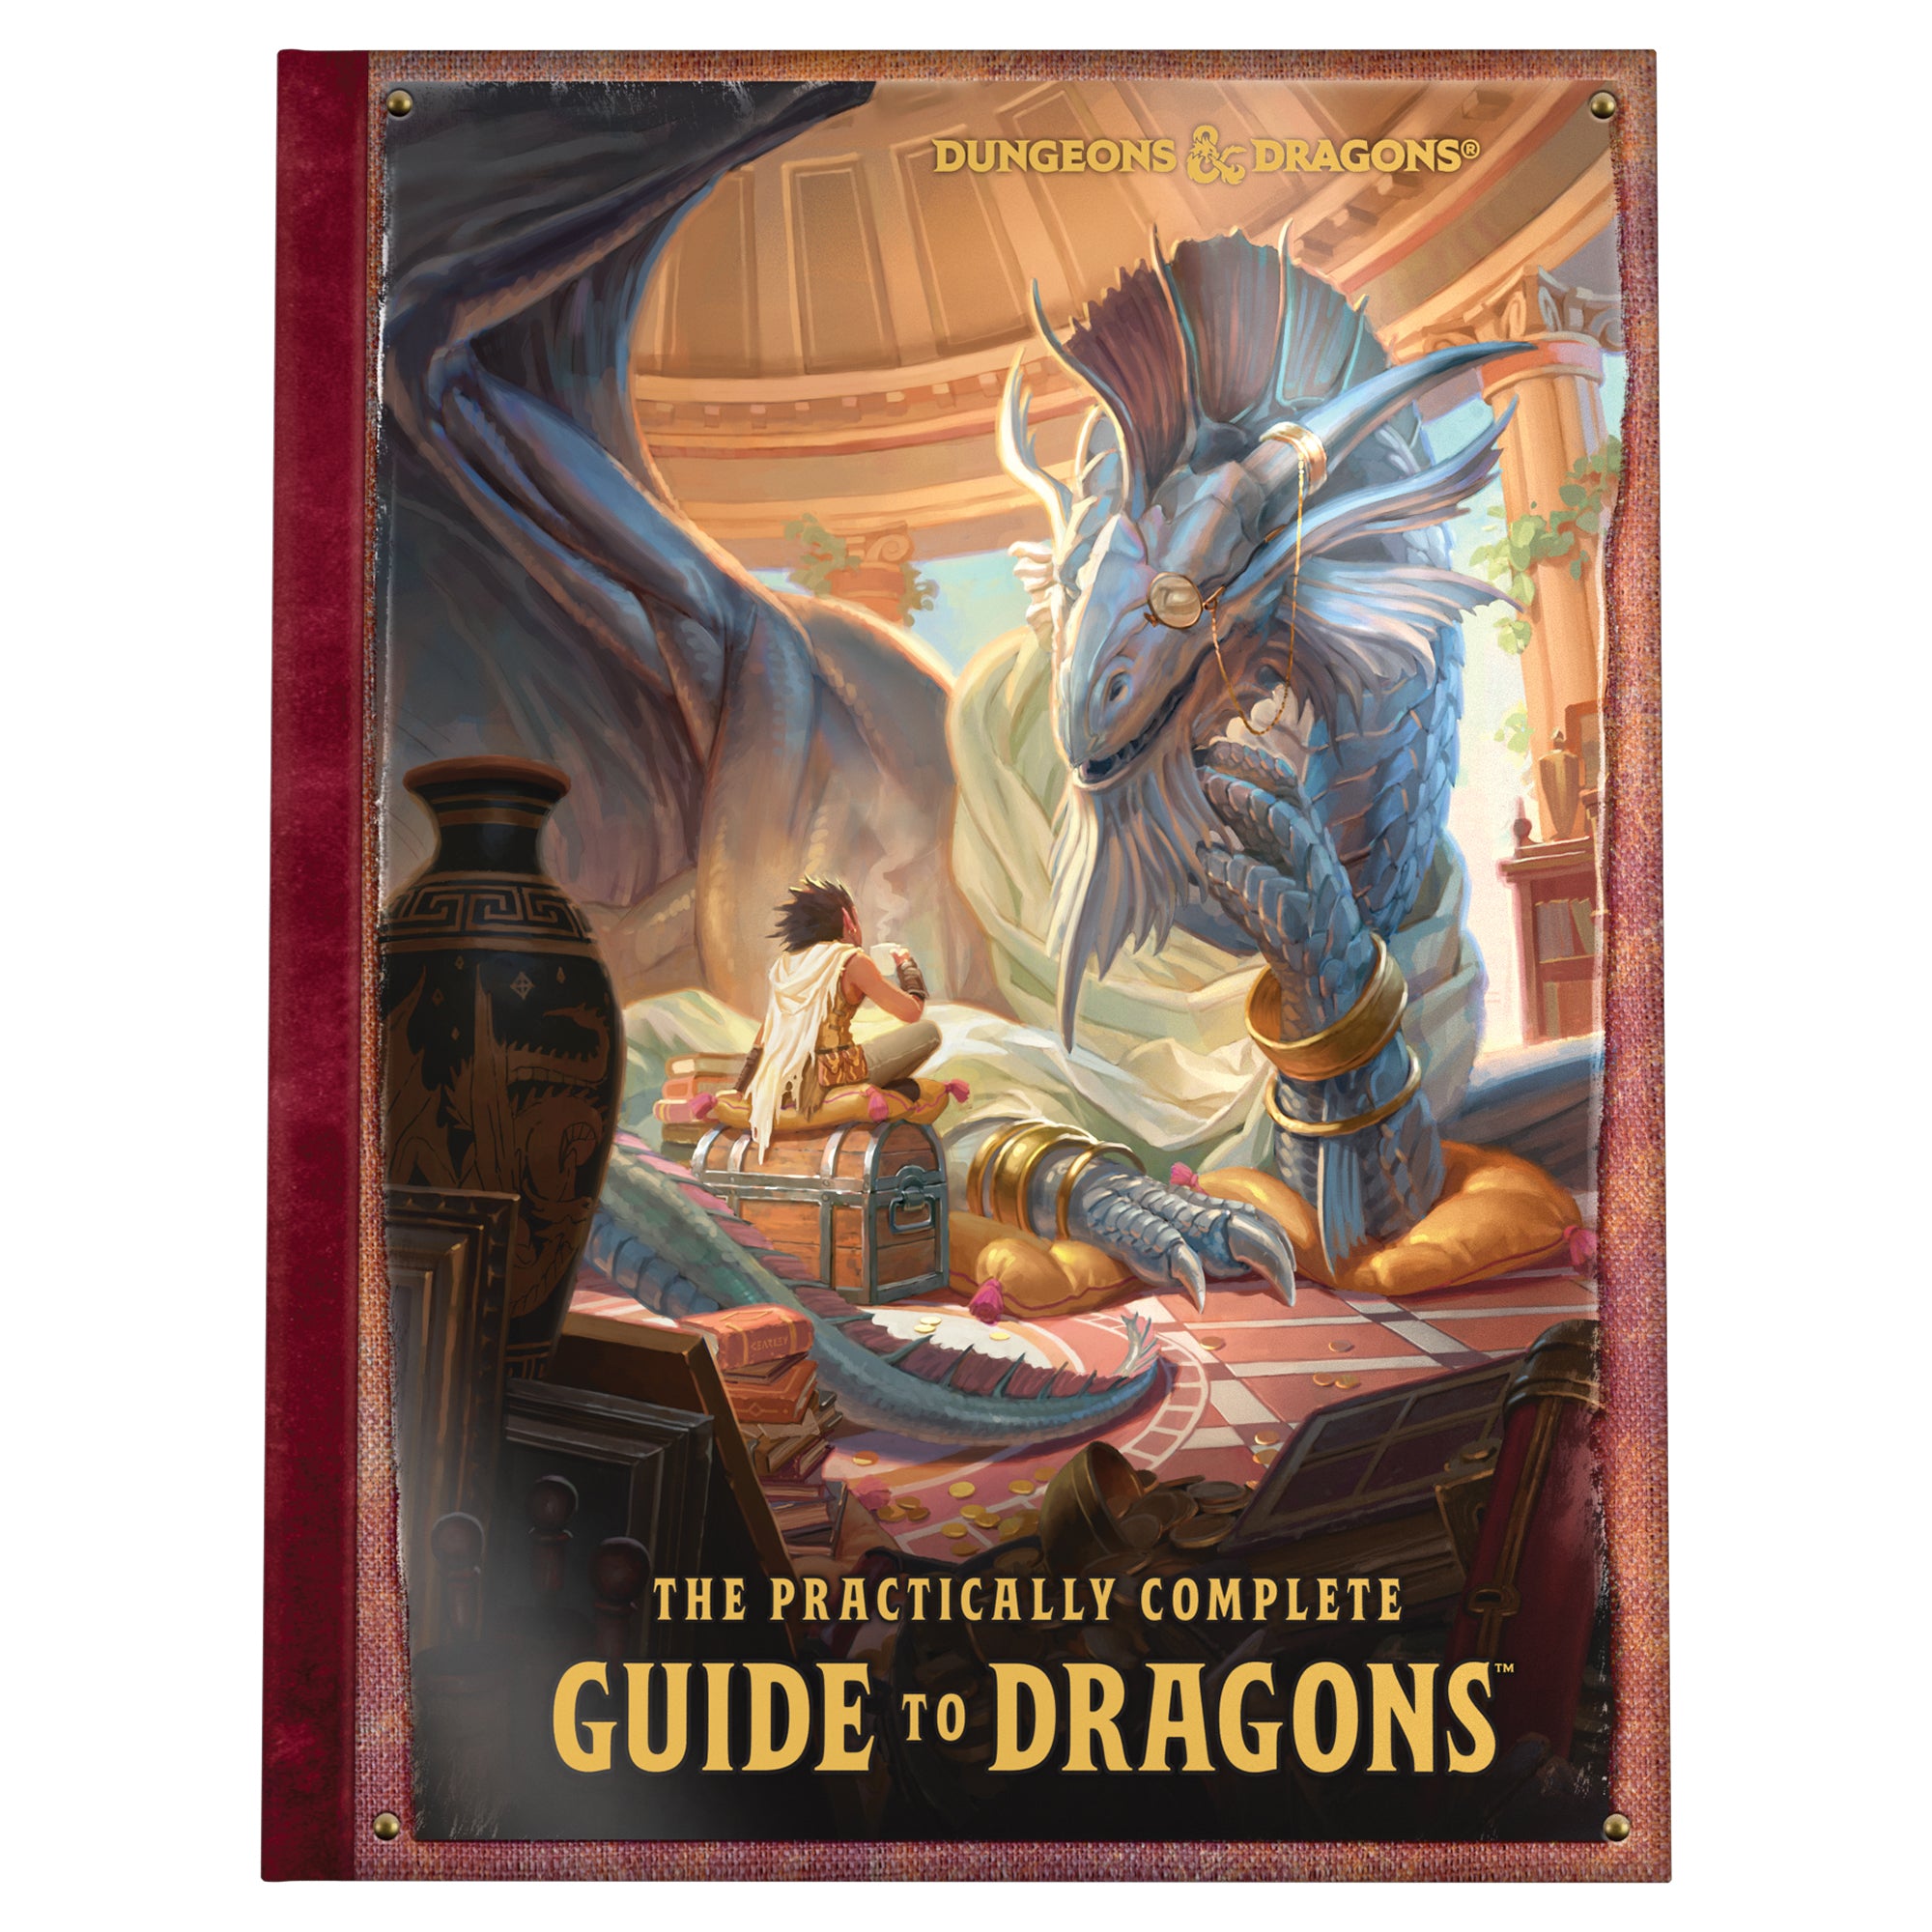 WCDD5CGD D&D THE PRACTICALLY COMPLETE GUIDE TO DRAGONS